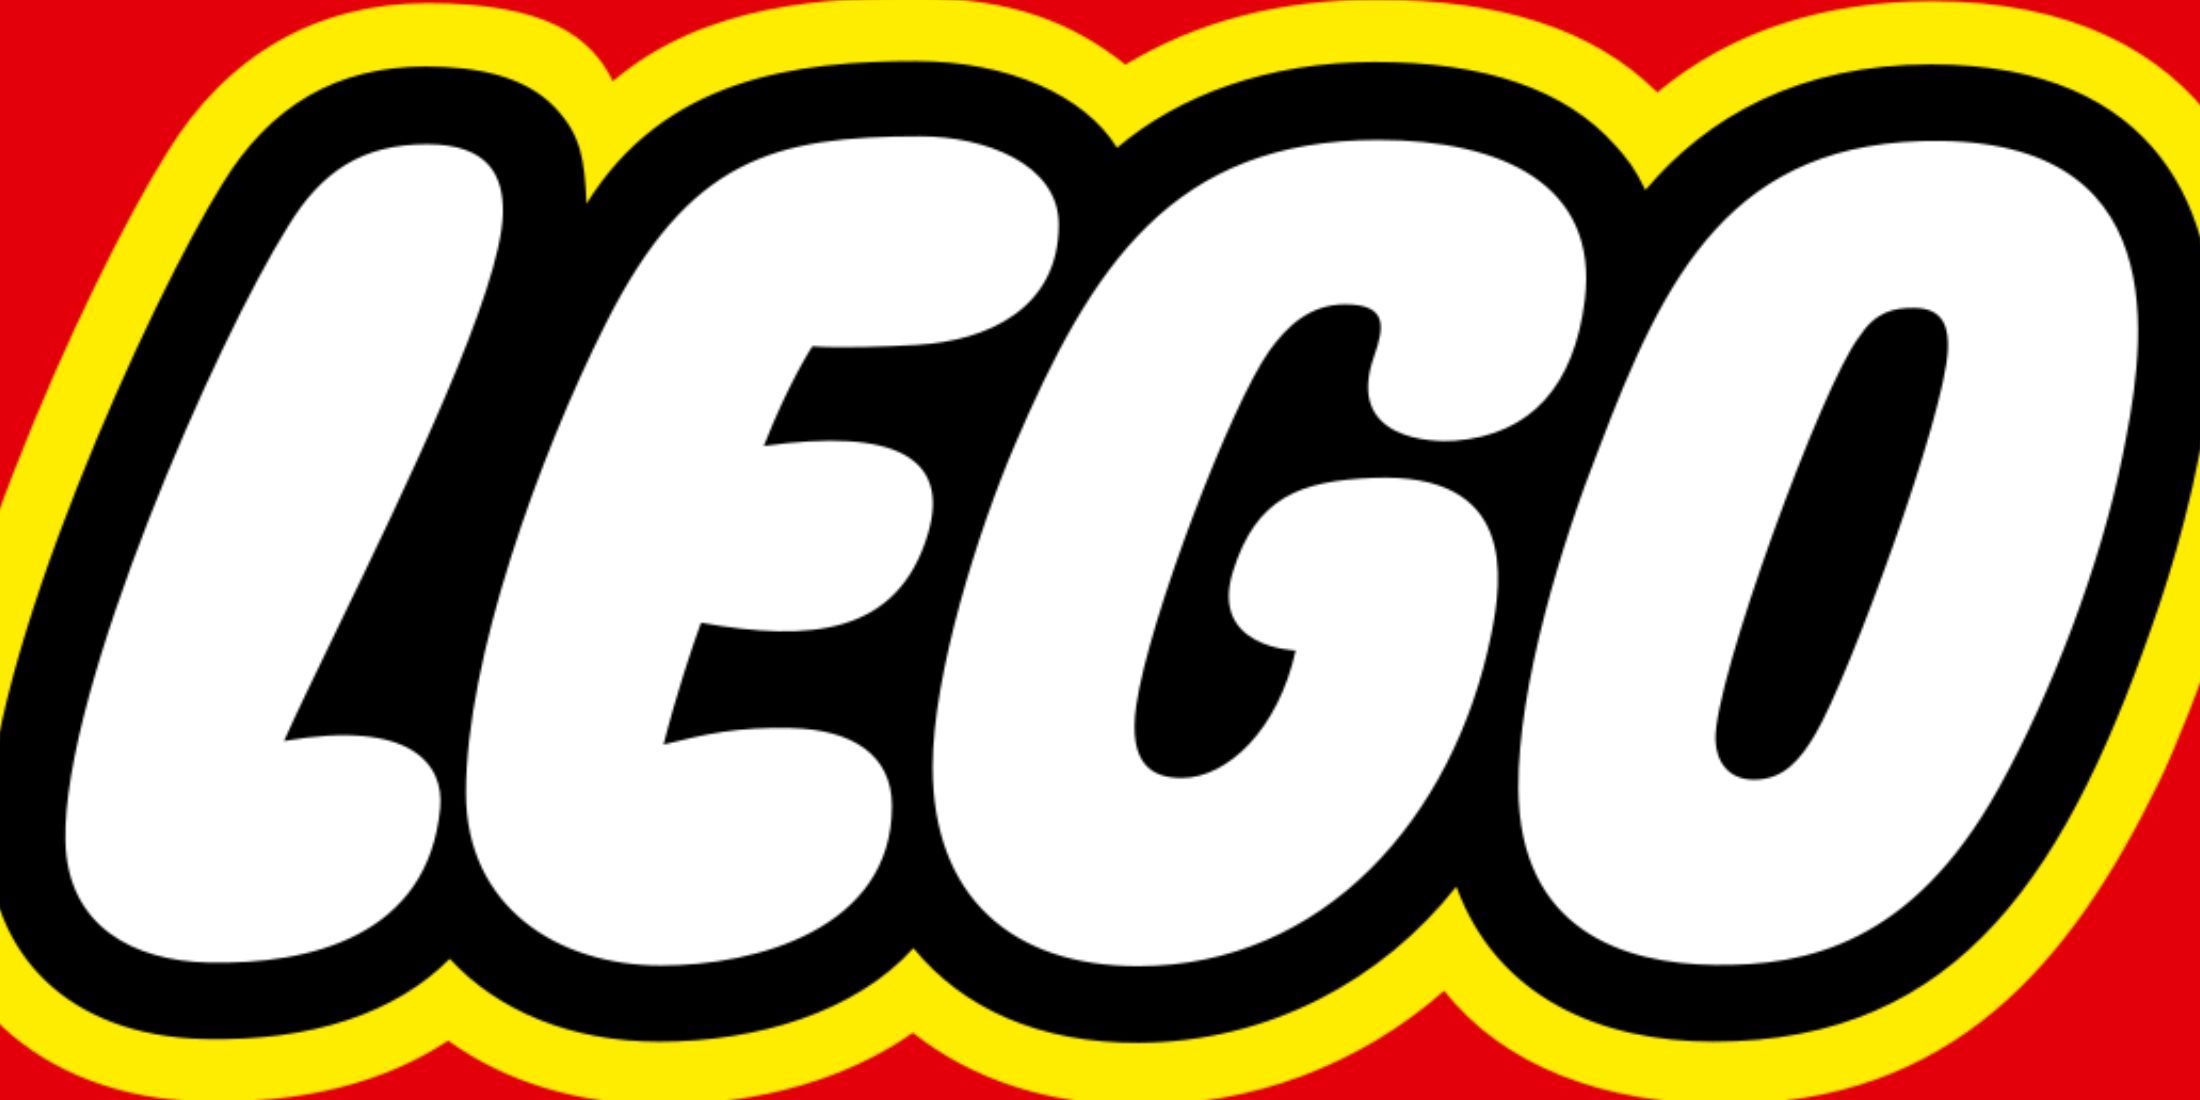 The logo for the toy company LEGO